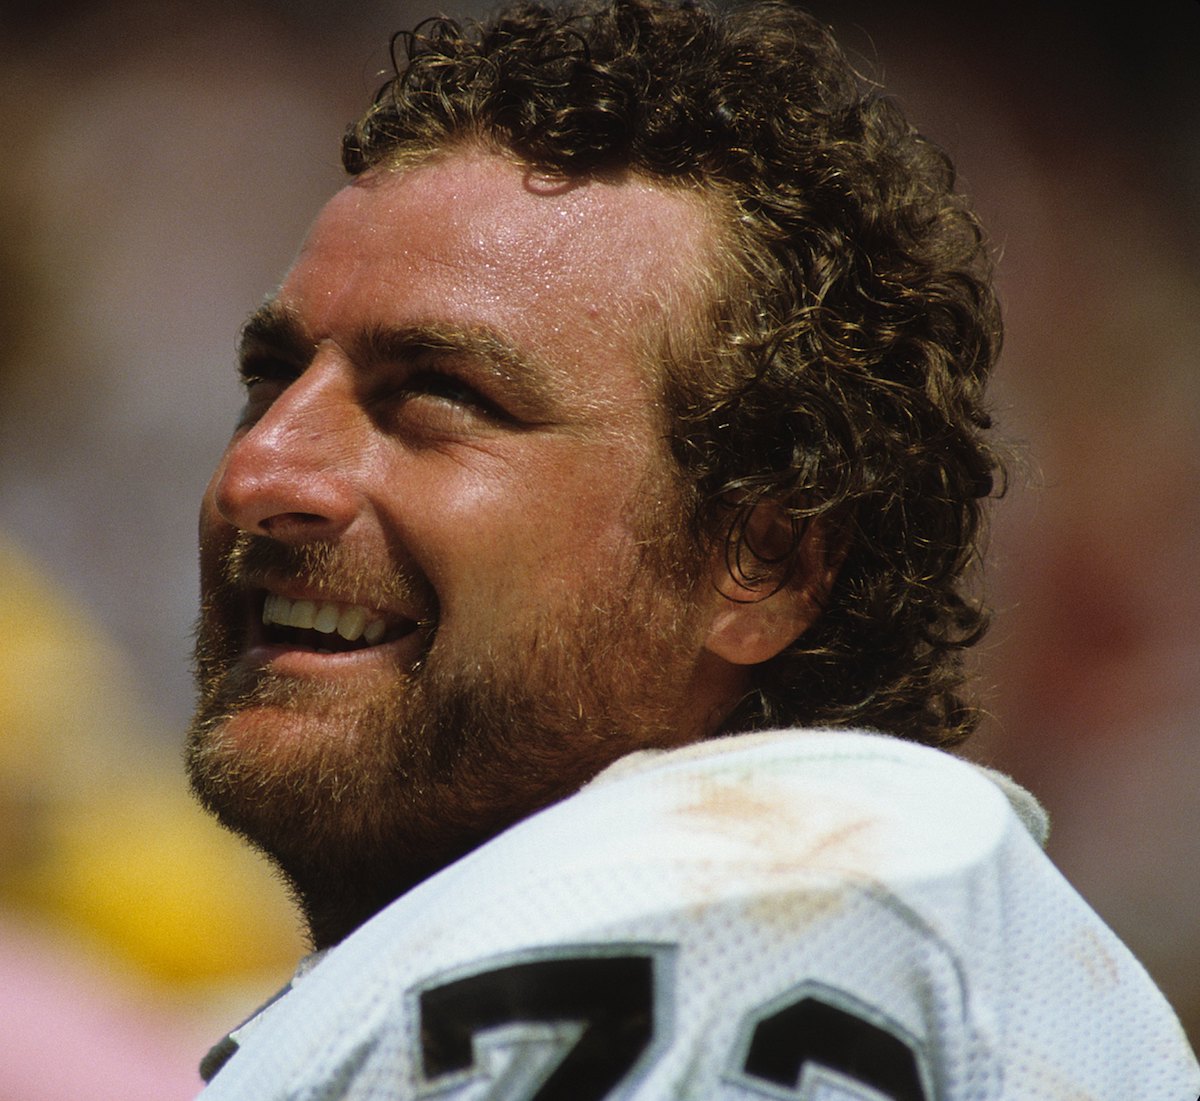 John Matuszak #72 of the Los Angeles Raiders during a game against the San Francisco 49ers on September 12, 1982 in San Francisco, California.